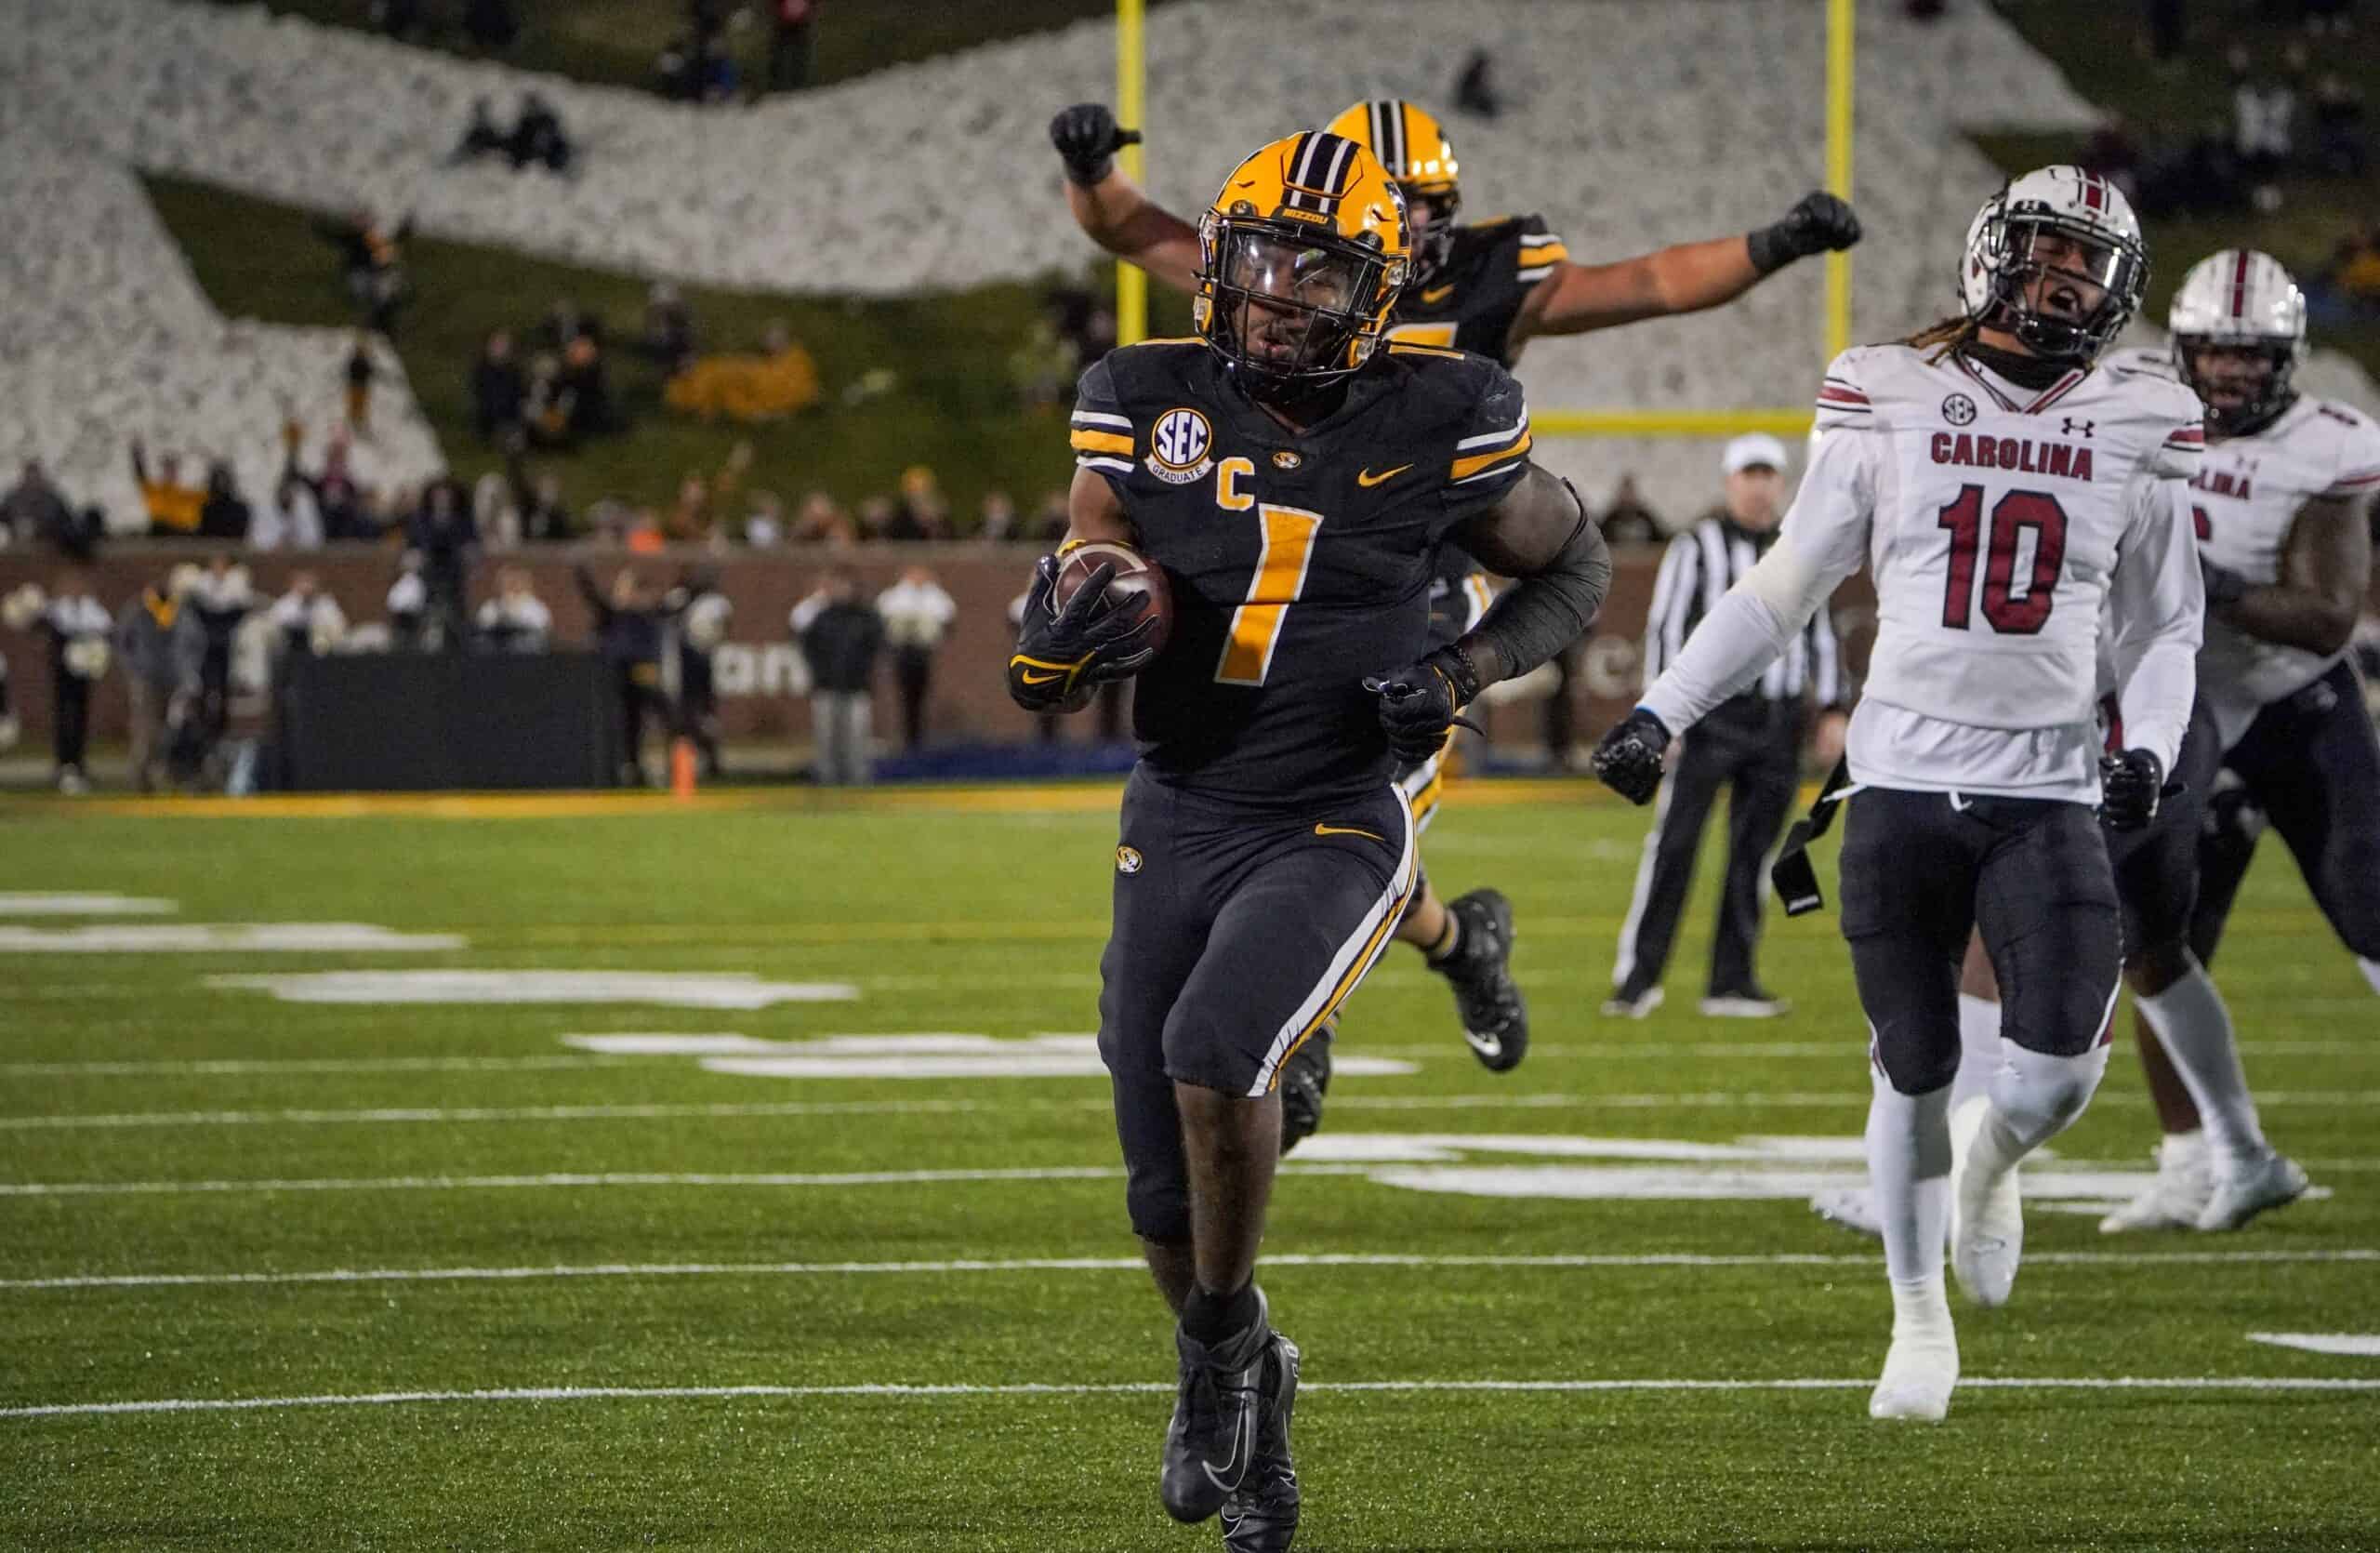 Missouri 2022 NFL Draft Scouting Reports include Akayleb Evans